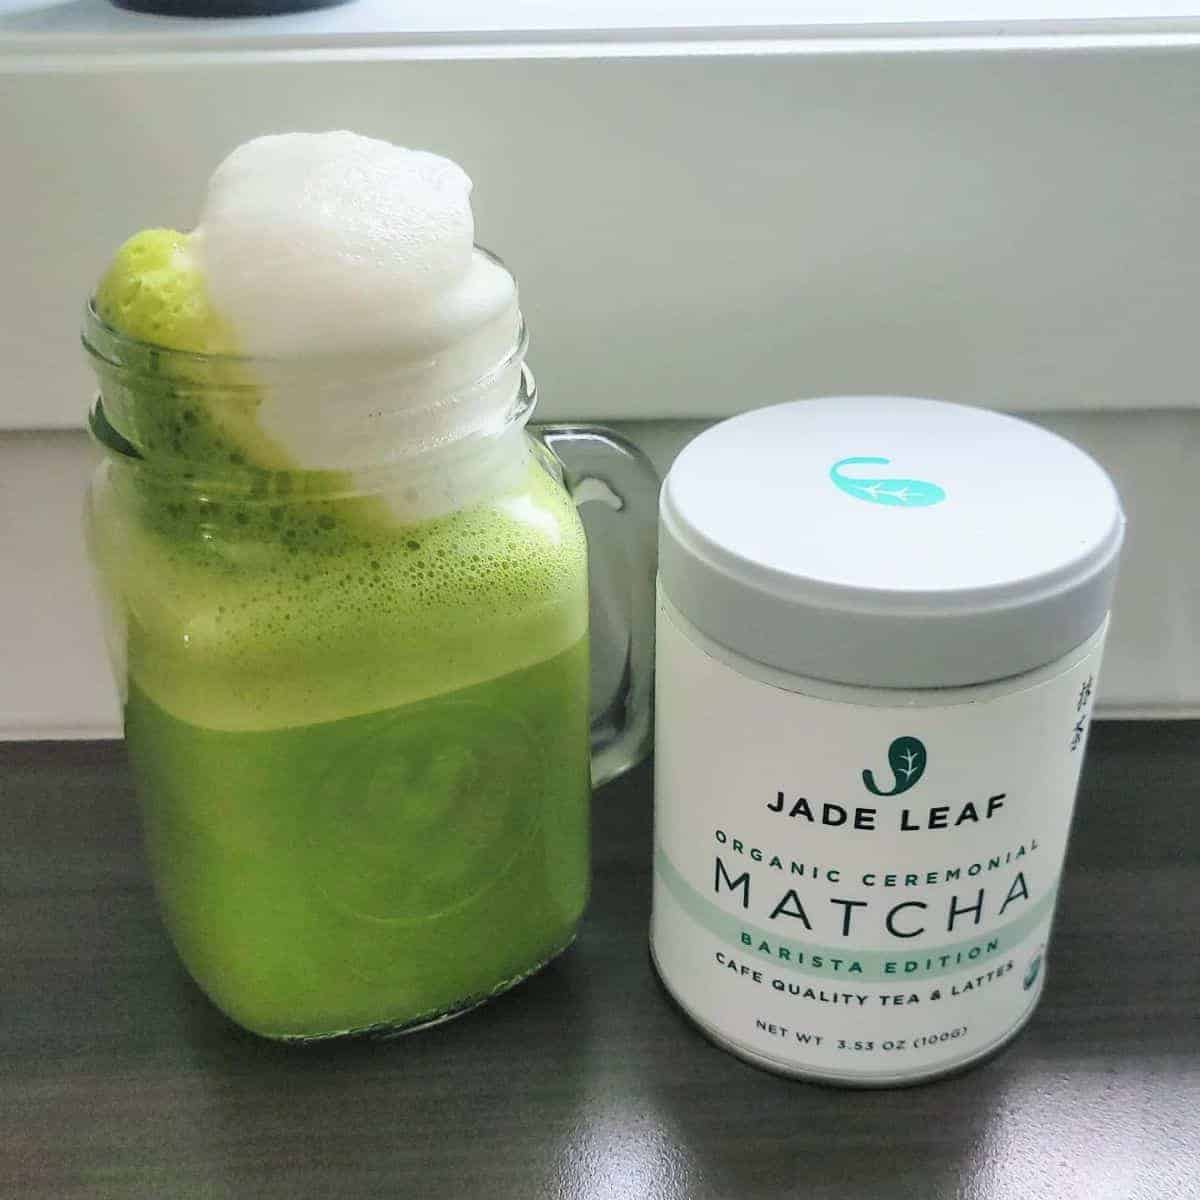 Delicious and bubbly matcha latte drink